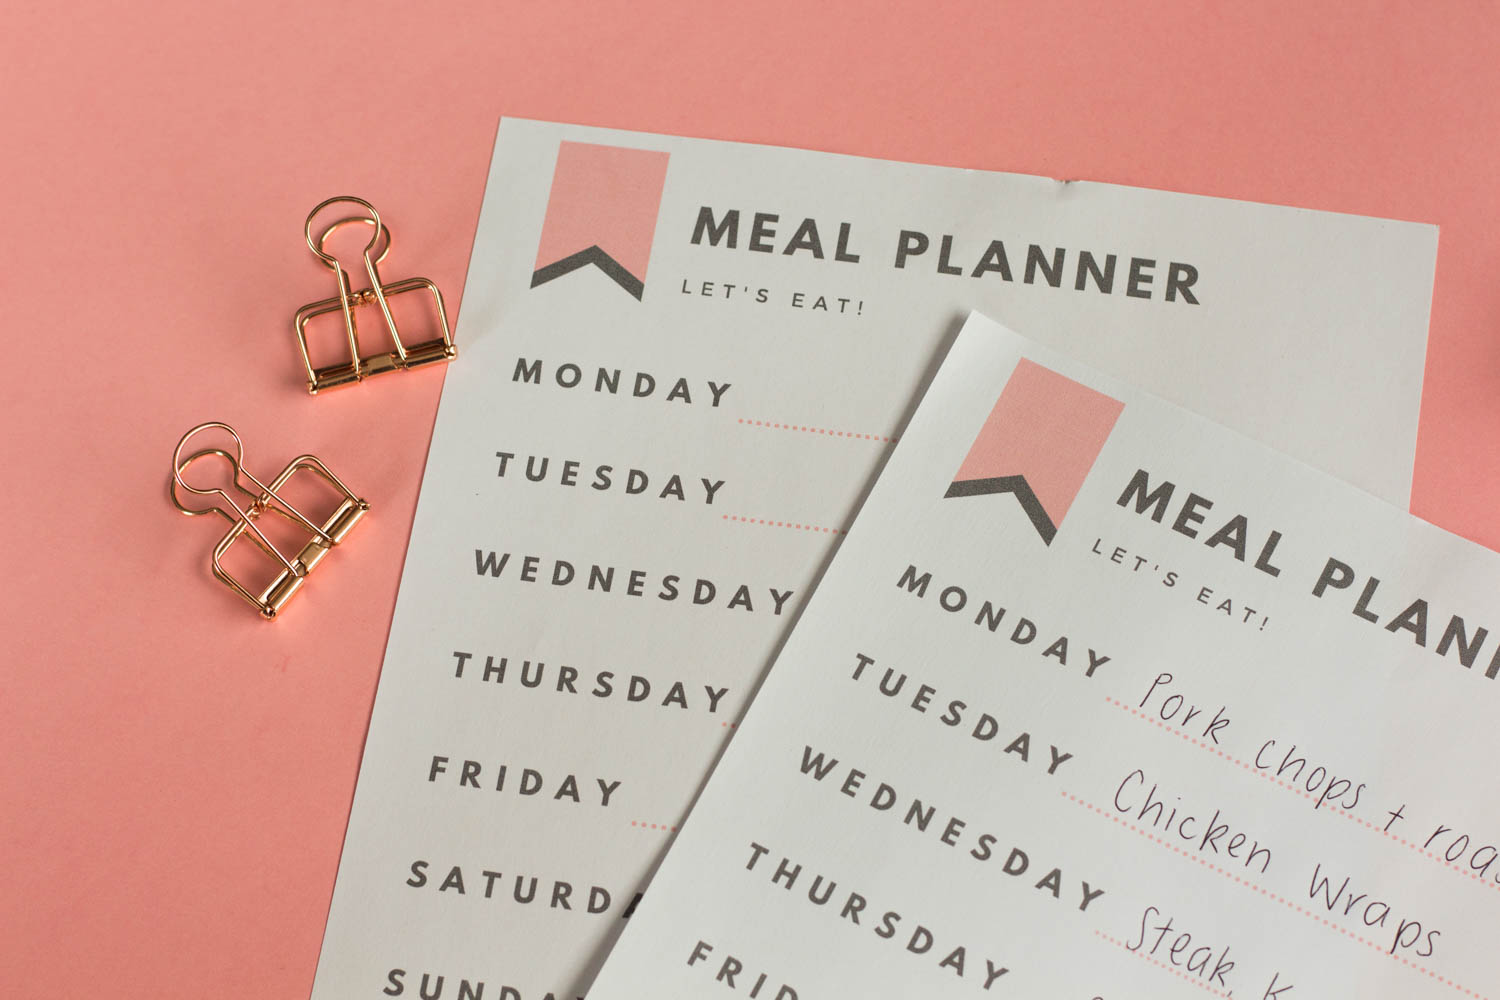 Meal planning basics, ideas, grocery tips, and printables.